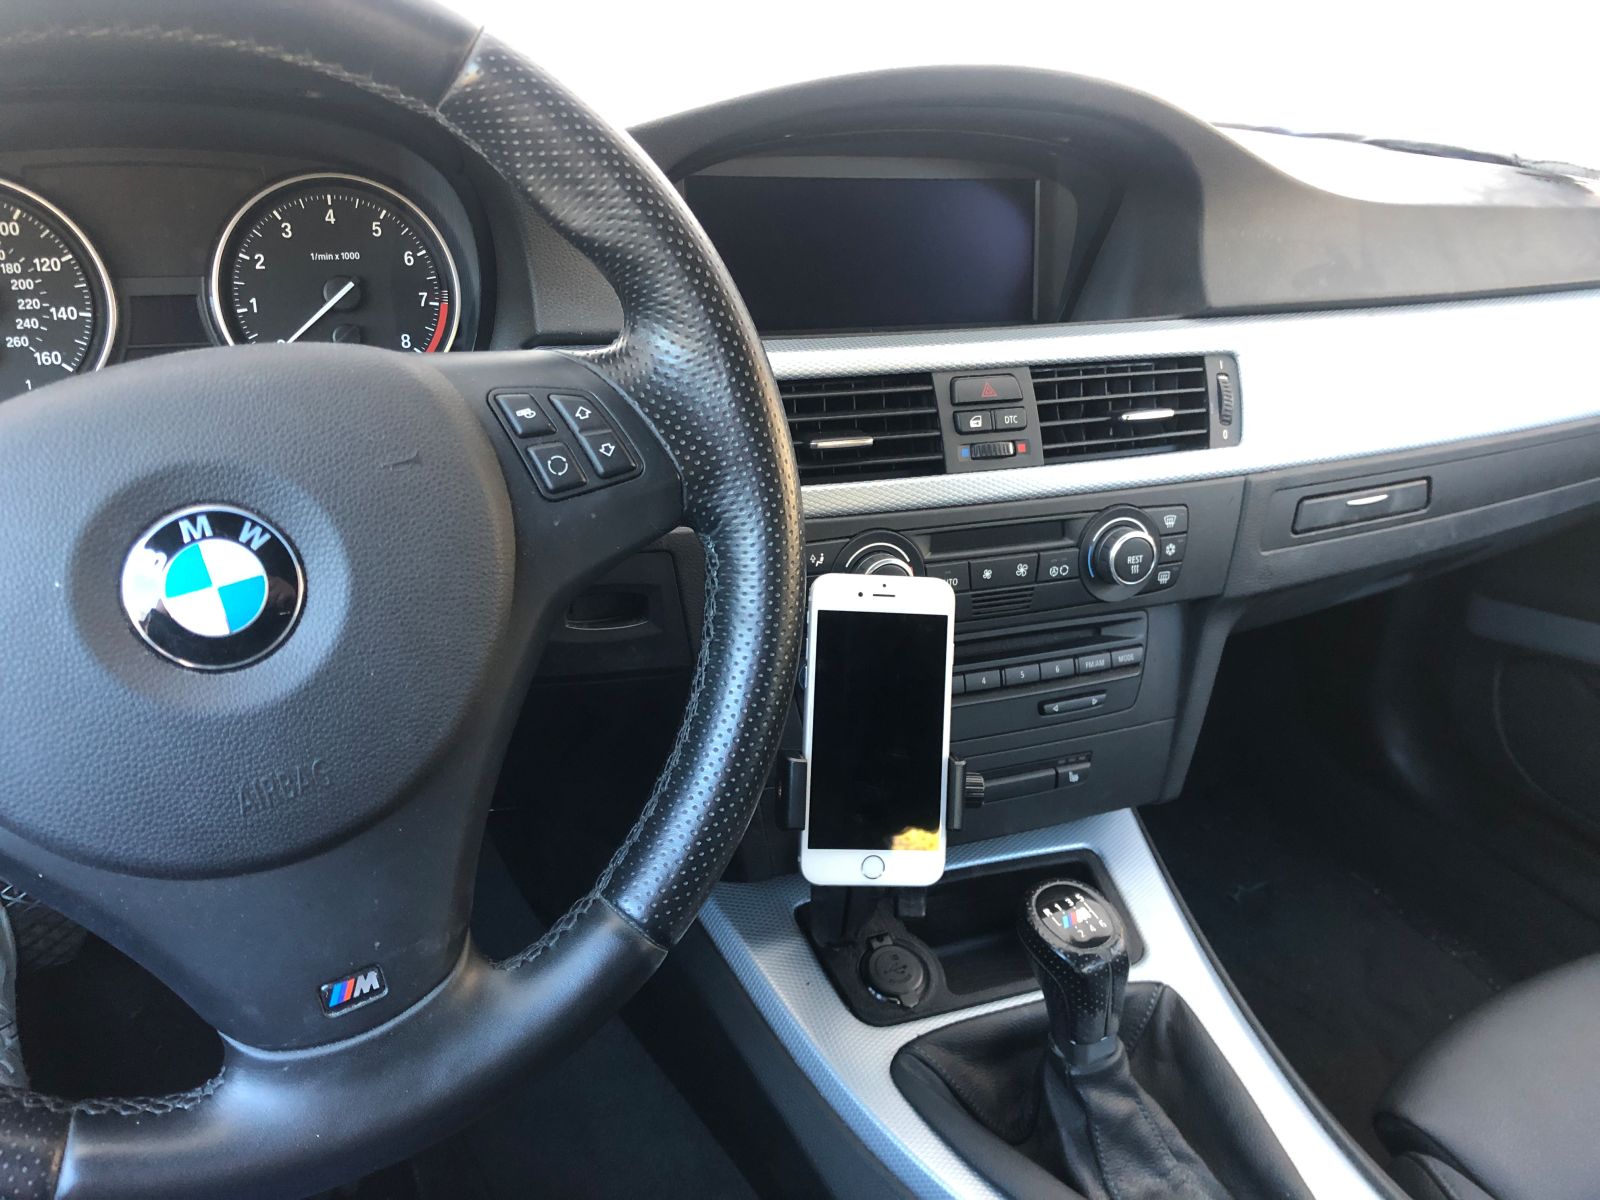 Illustration for article titled Final iteration of the E9X phone holder has been installed into my car